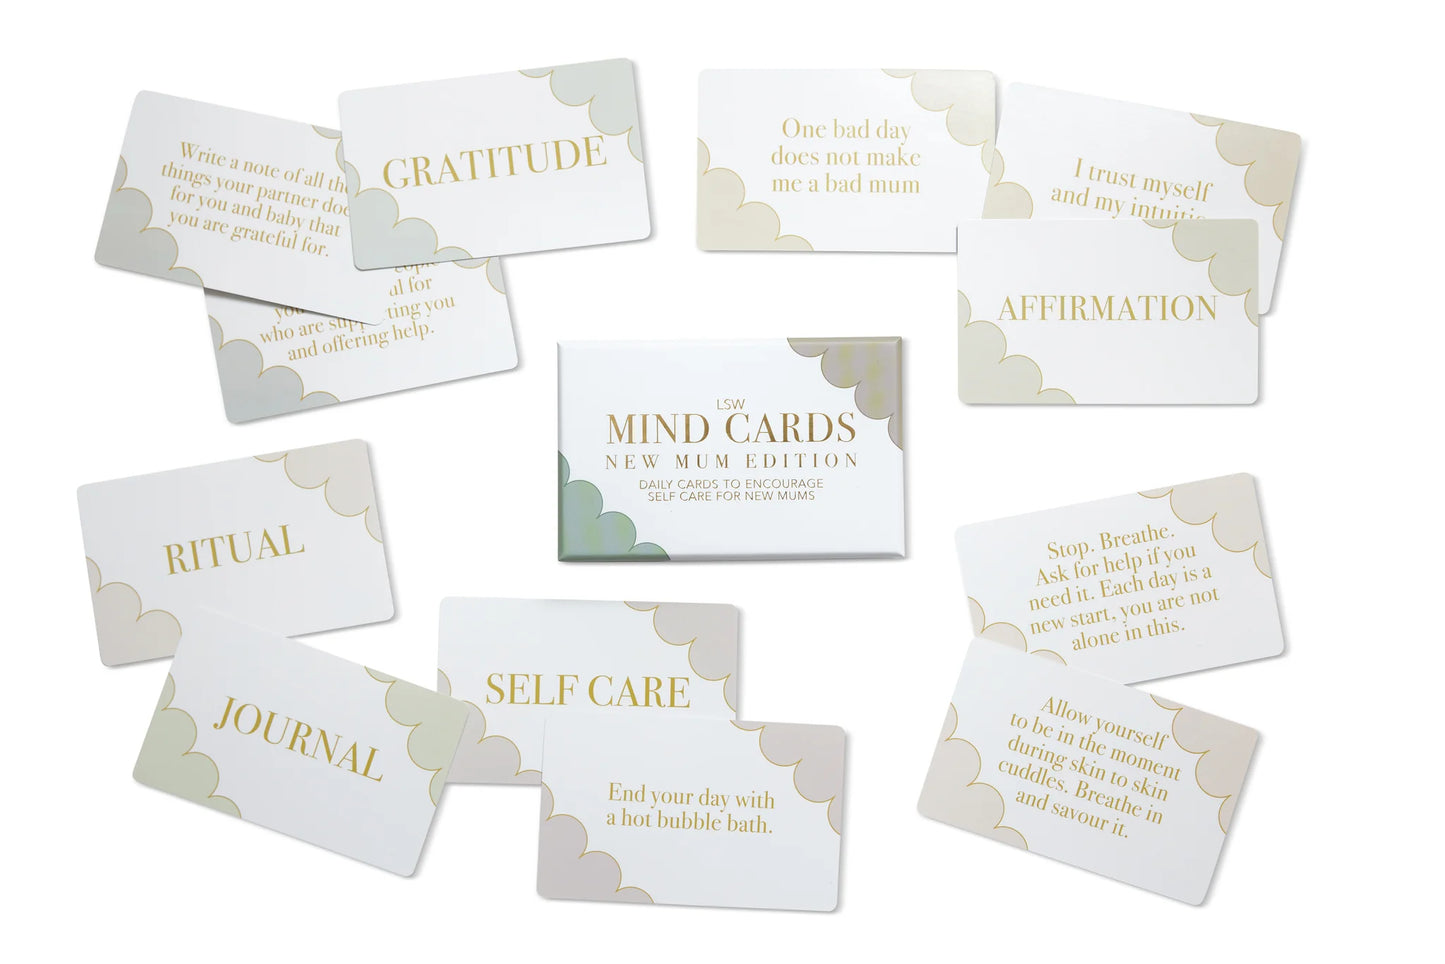 Stationery: LSW New Mum Self Love Mind Cards